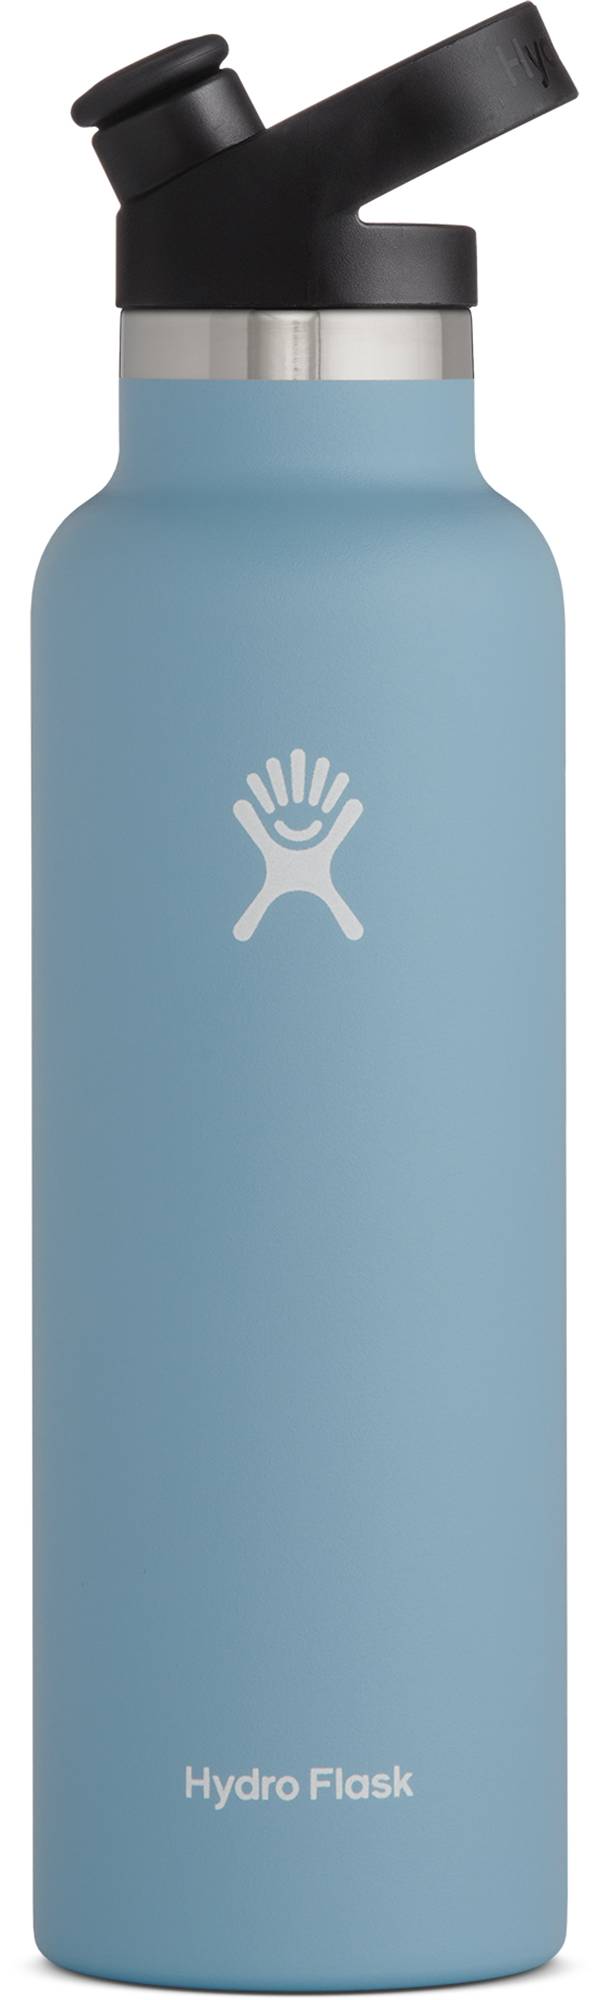 Hydro Flask Standard Mouth 21 oz. Bottle with Sport Cap product image